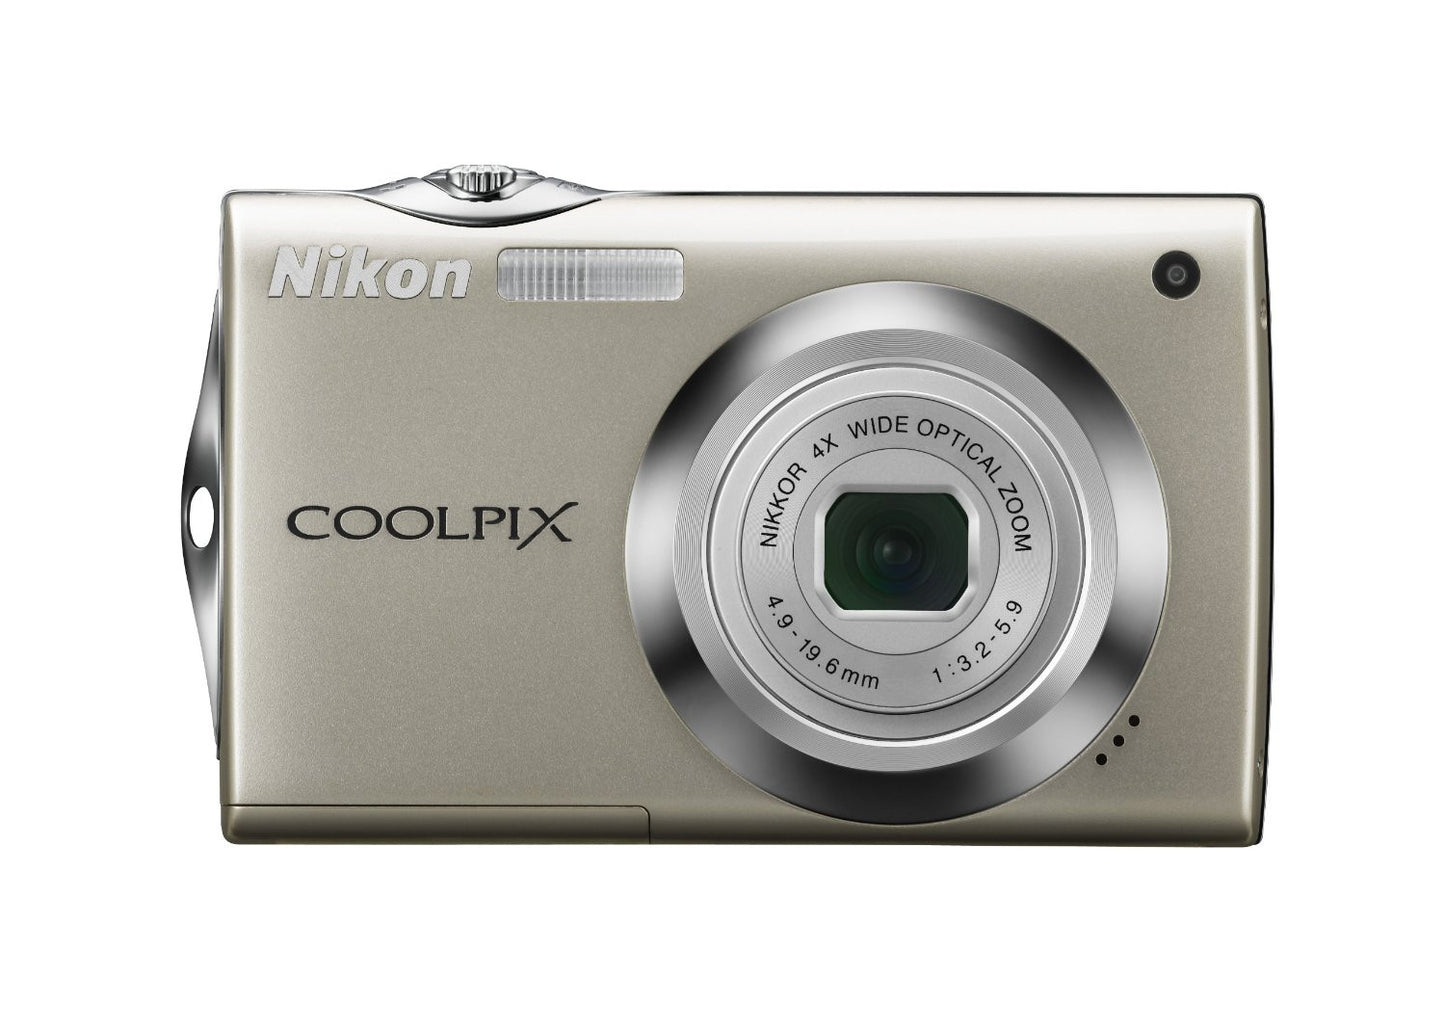 Nikon Coolpix S4000 12 MP Digital Camera with 4x Optical Vibration Reduction (VR) Zoom and 3.0-Inch Touch-Panel LCD (Silver) - worldtradesolution.com
